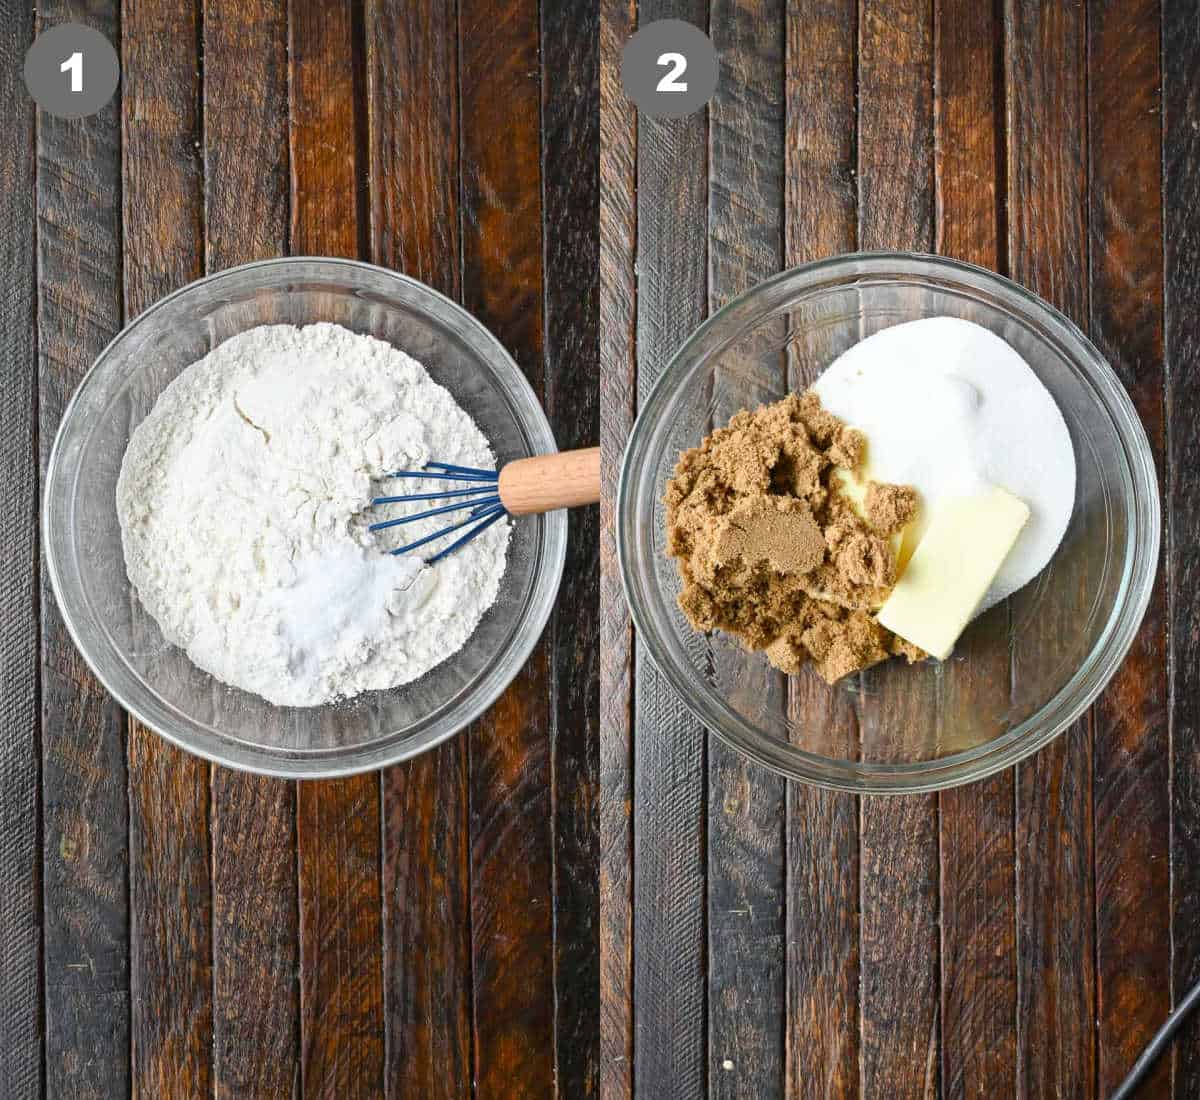 All the dry ingredients mixed together in a bowl. Then in another bowl add the butter and sugars and mix.